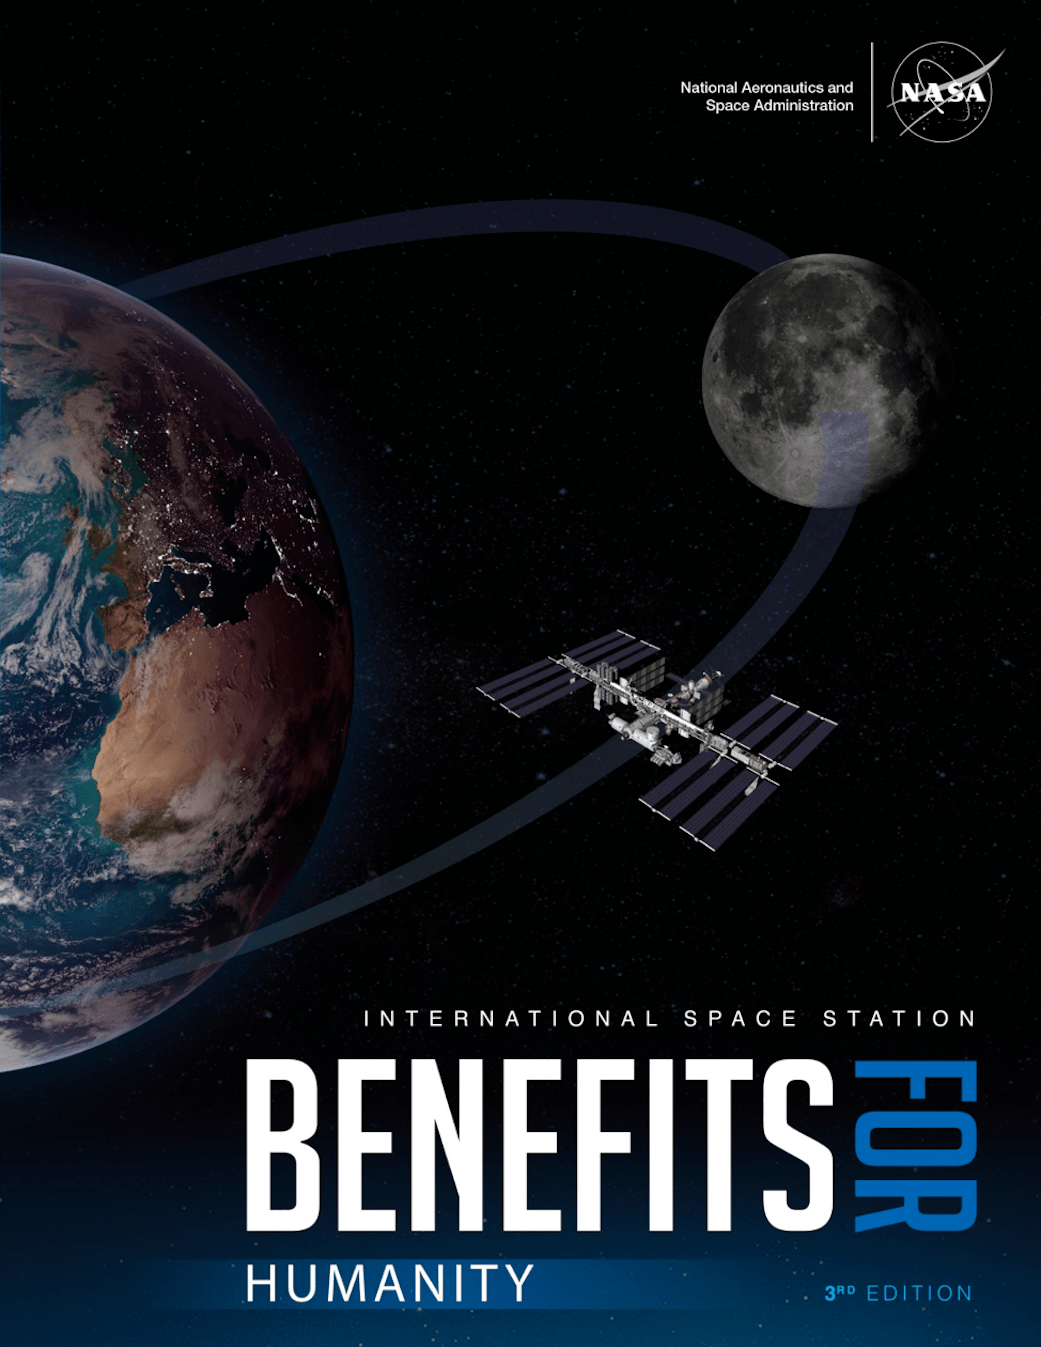 Cover of the book, International Space Station Benefits for Humanity, 3rd Edition